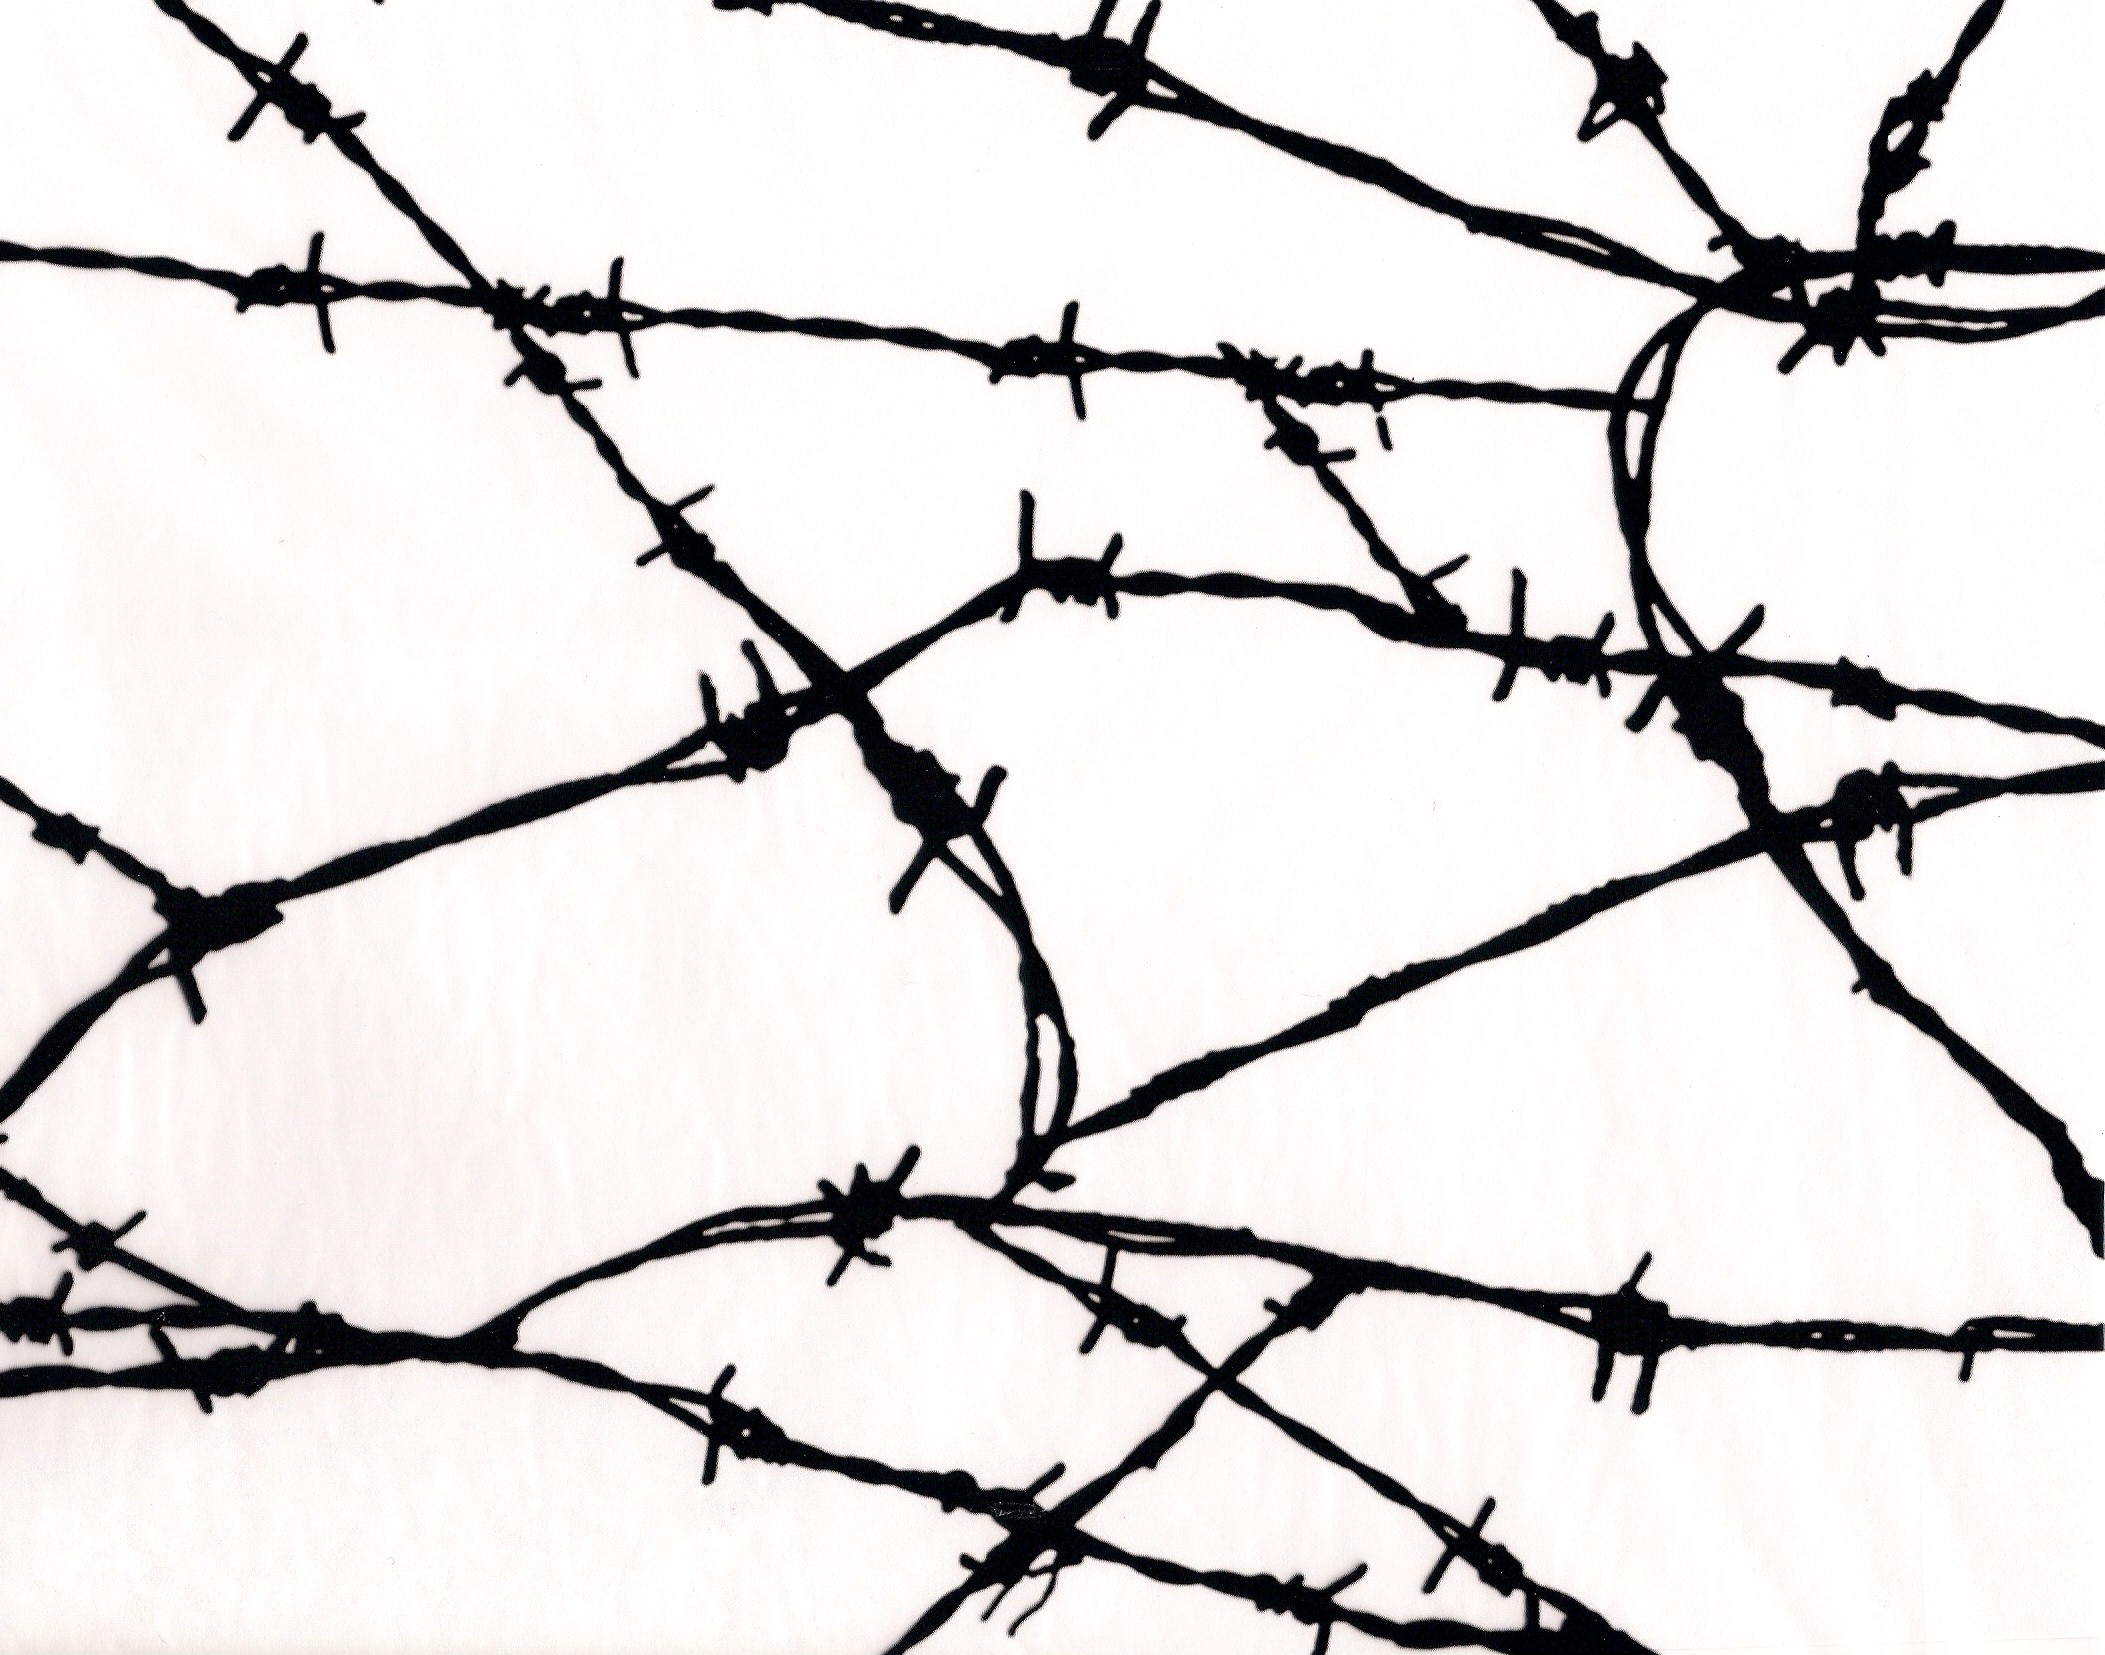 CC BY-NC-ND 4.0 image/jpeg Resolution: 2105×1655, File size: 598Kb, Black Barbed Wire Drawing